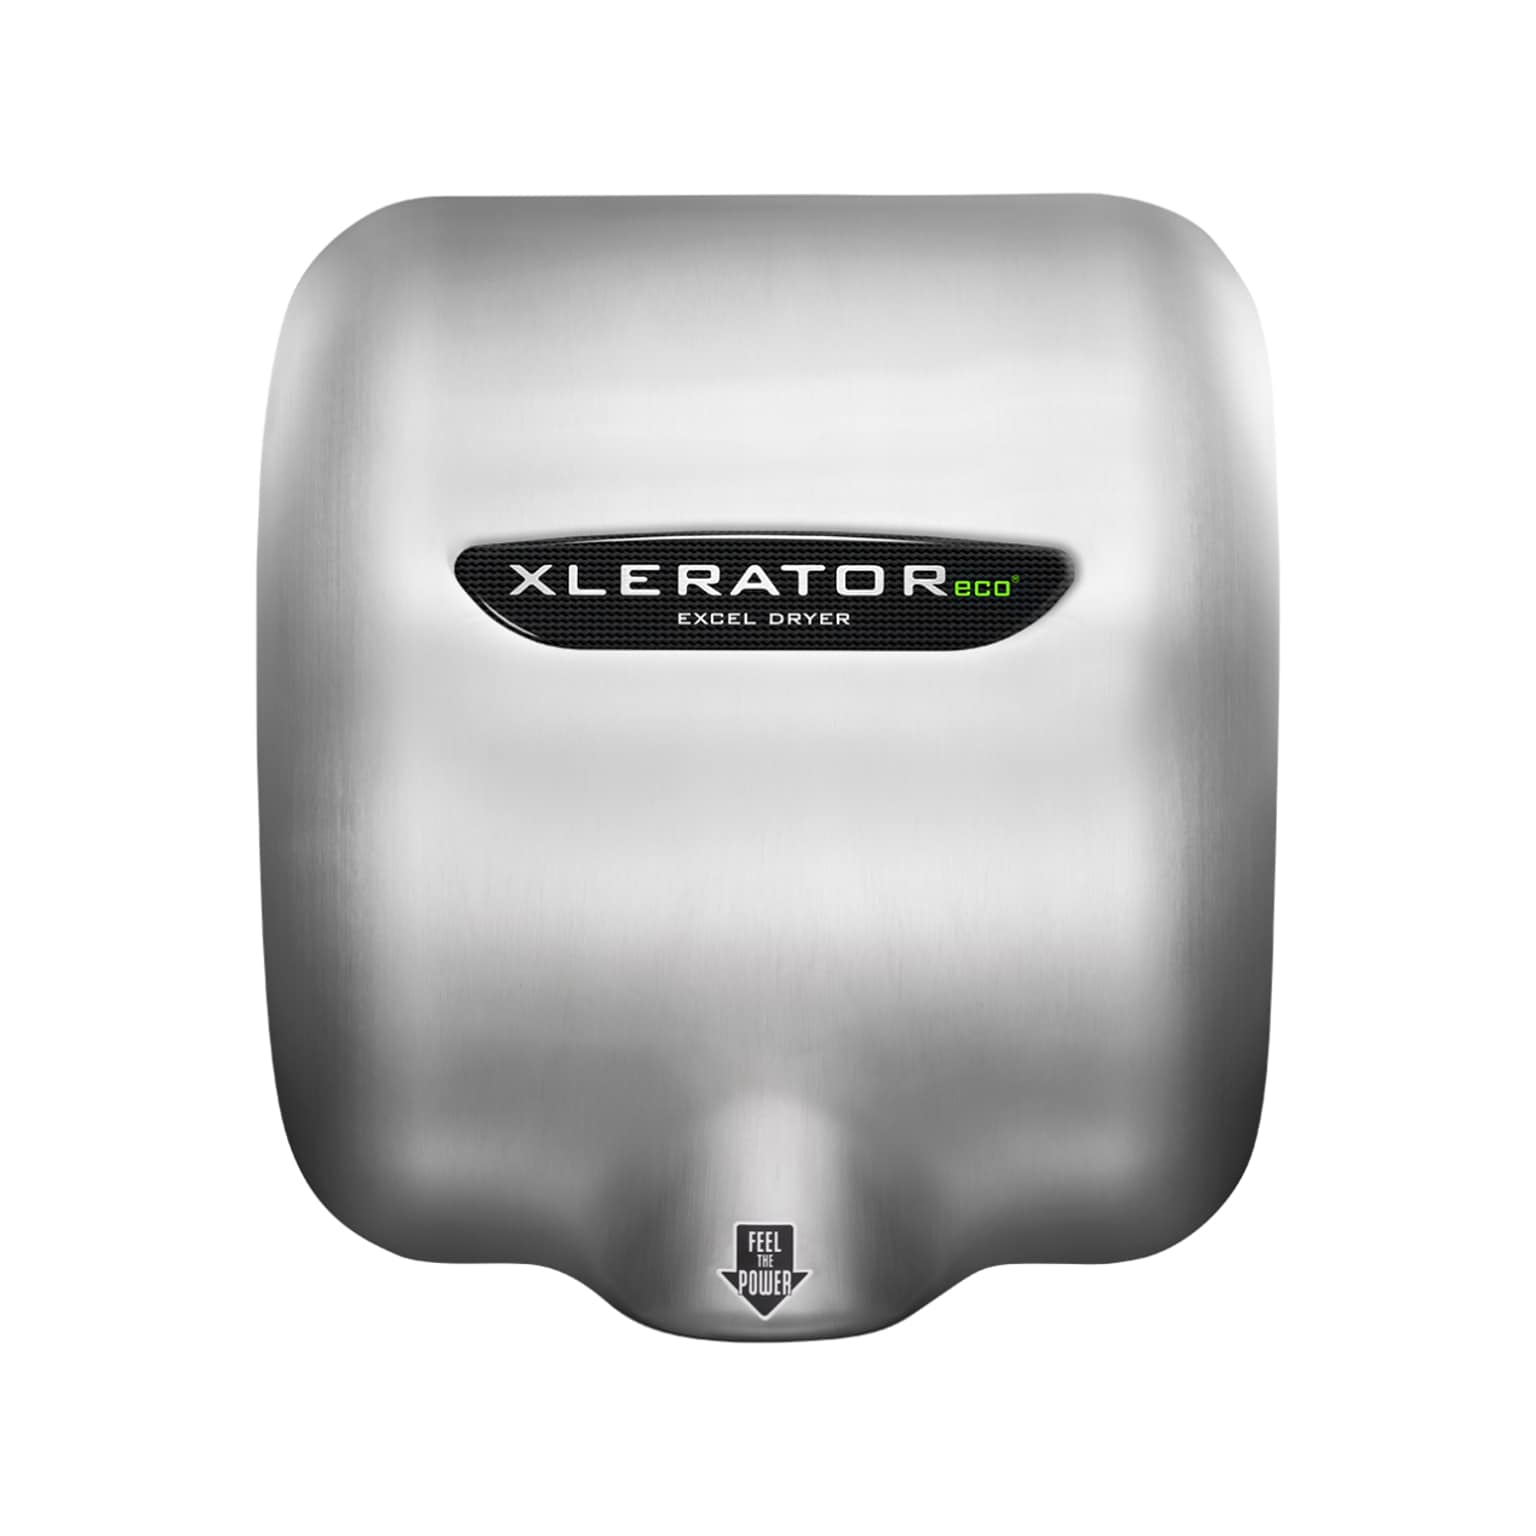 XLERATOReco 110-120V Automatic Hand Dryer, Brushed Stainless Steel (704161A)